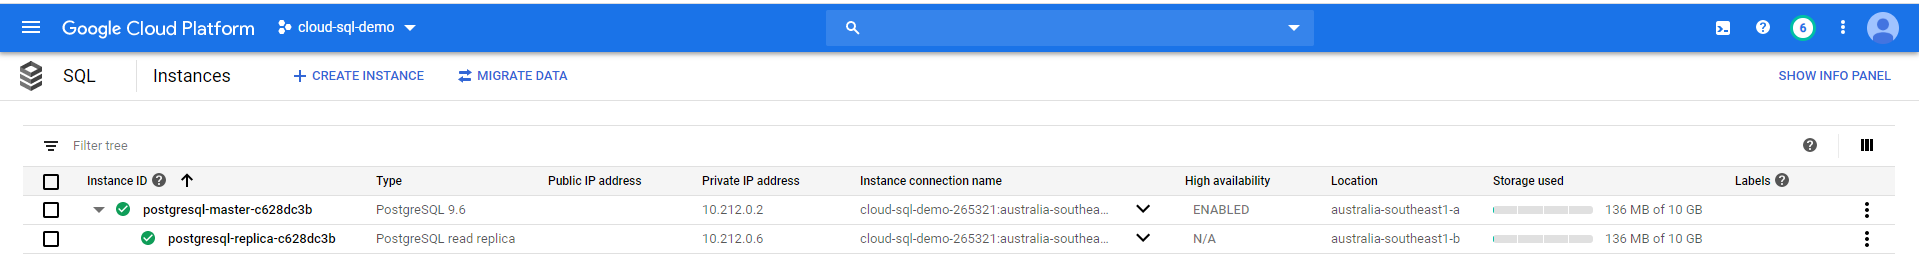 Cloud SQL Instances - showing master and replica